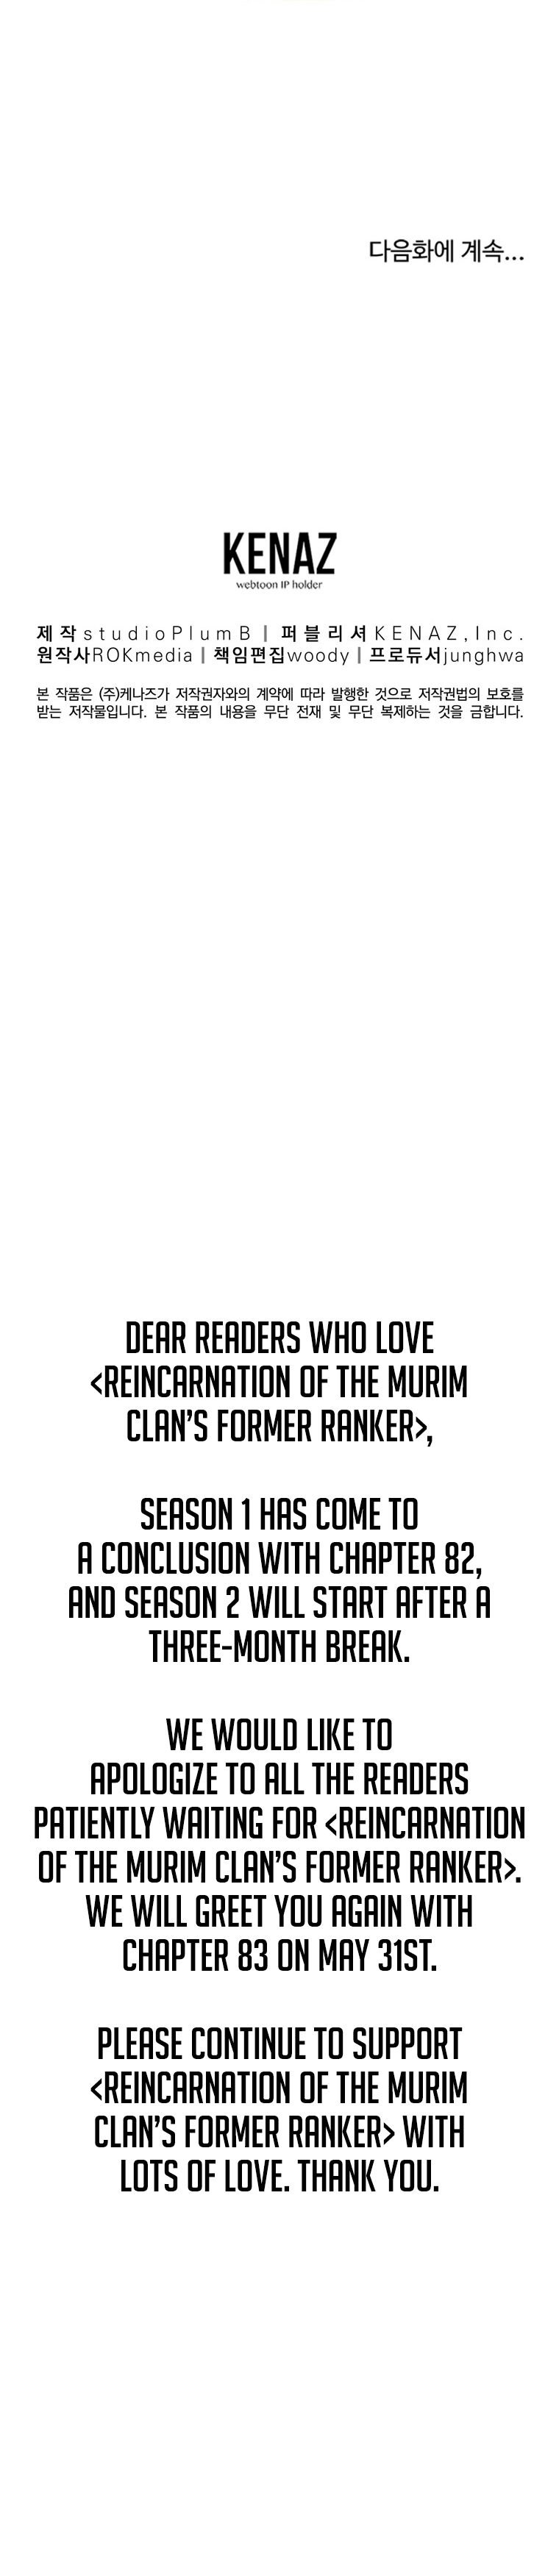 reincarnation-of-the-murim-clans-former-ranker-chap-82-14